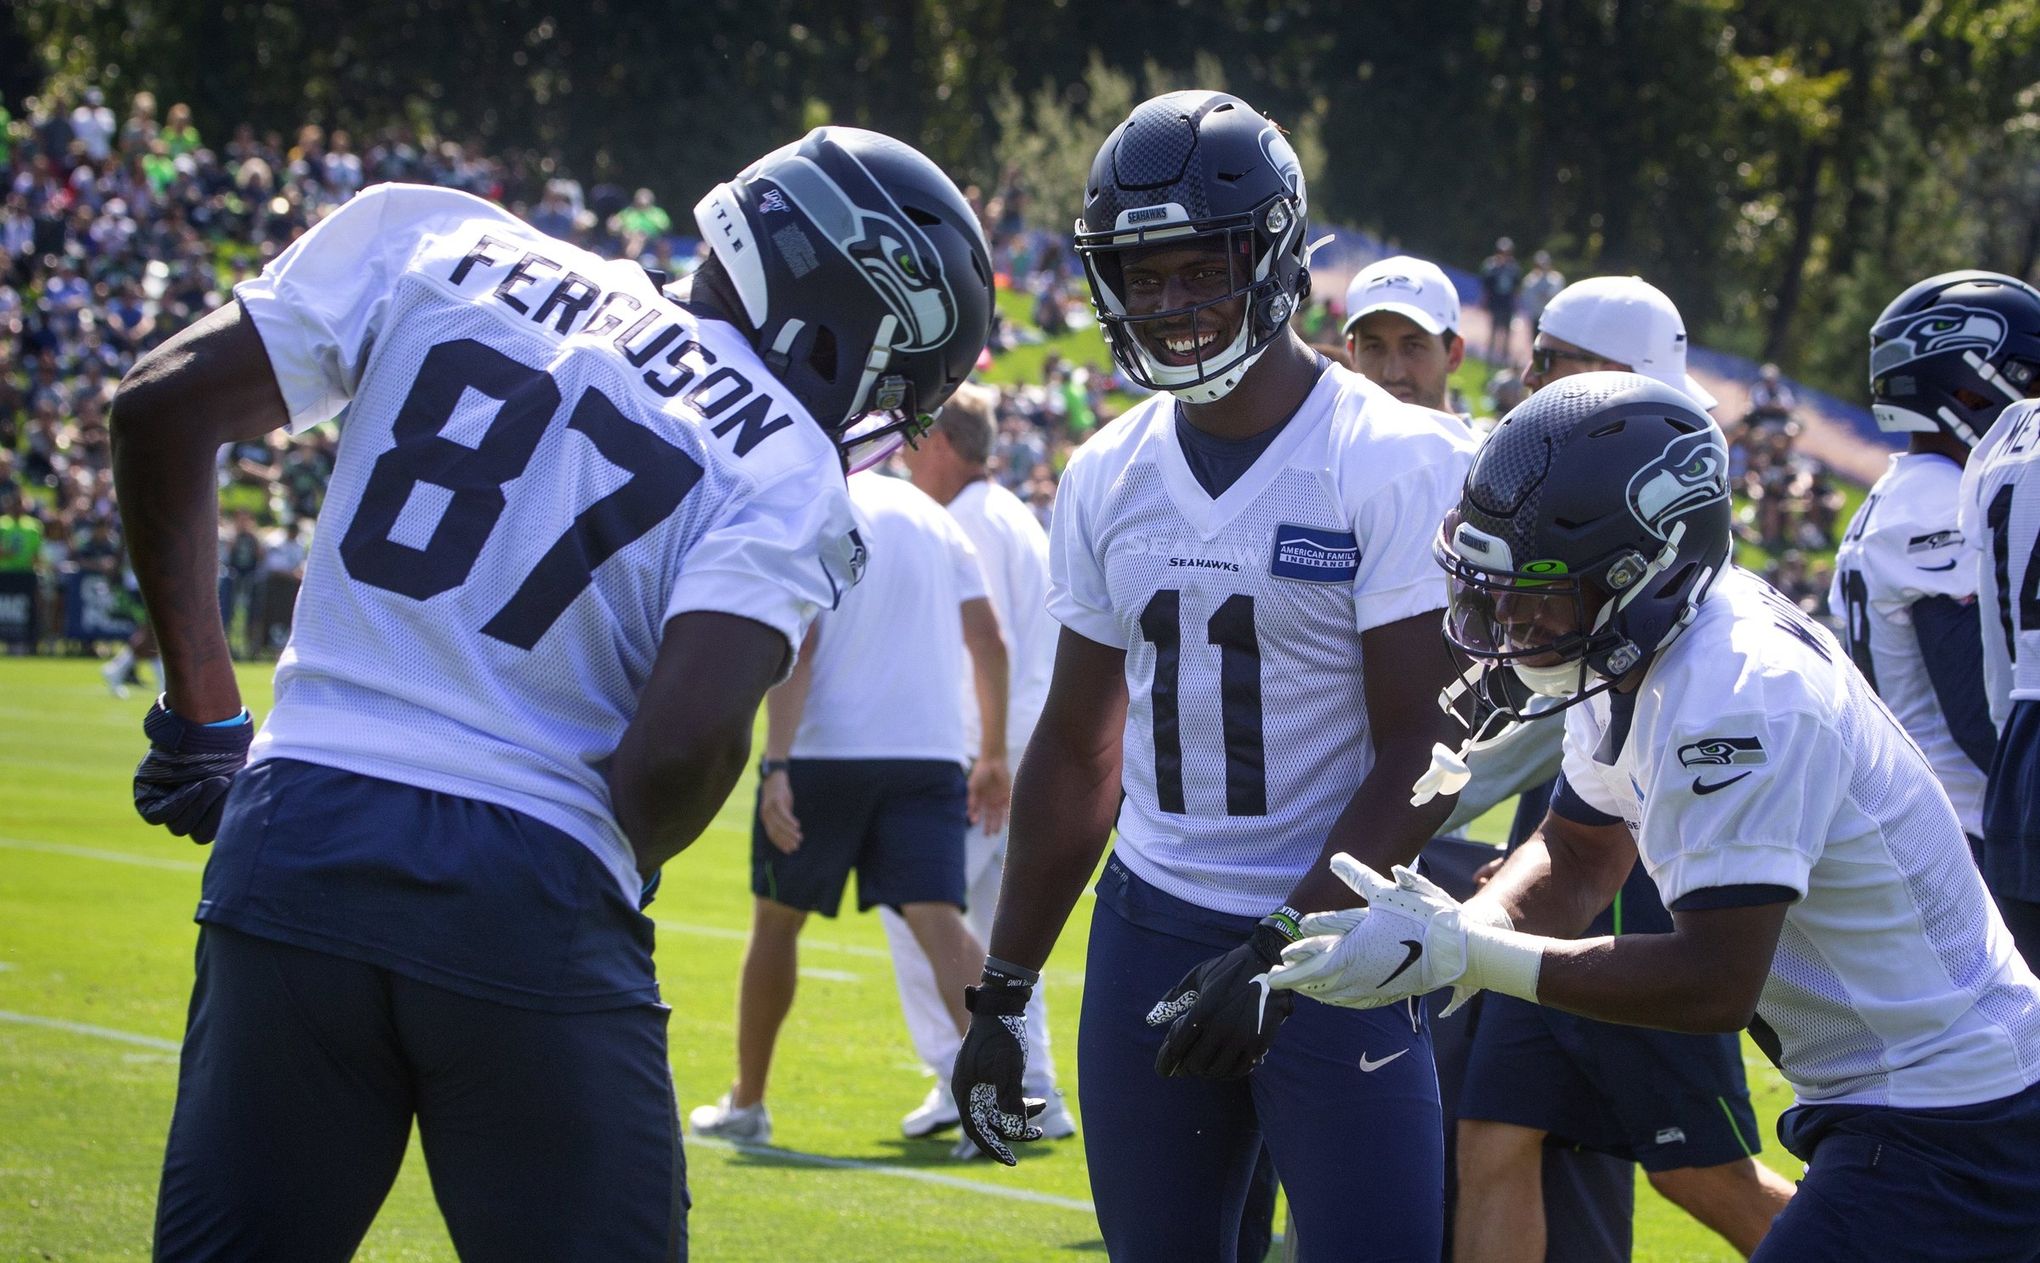 Quiet night from Seahawks rookie DK Metcalf is a reminder to scale back the  near-hysterical hype